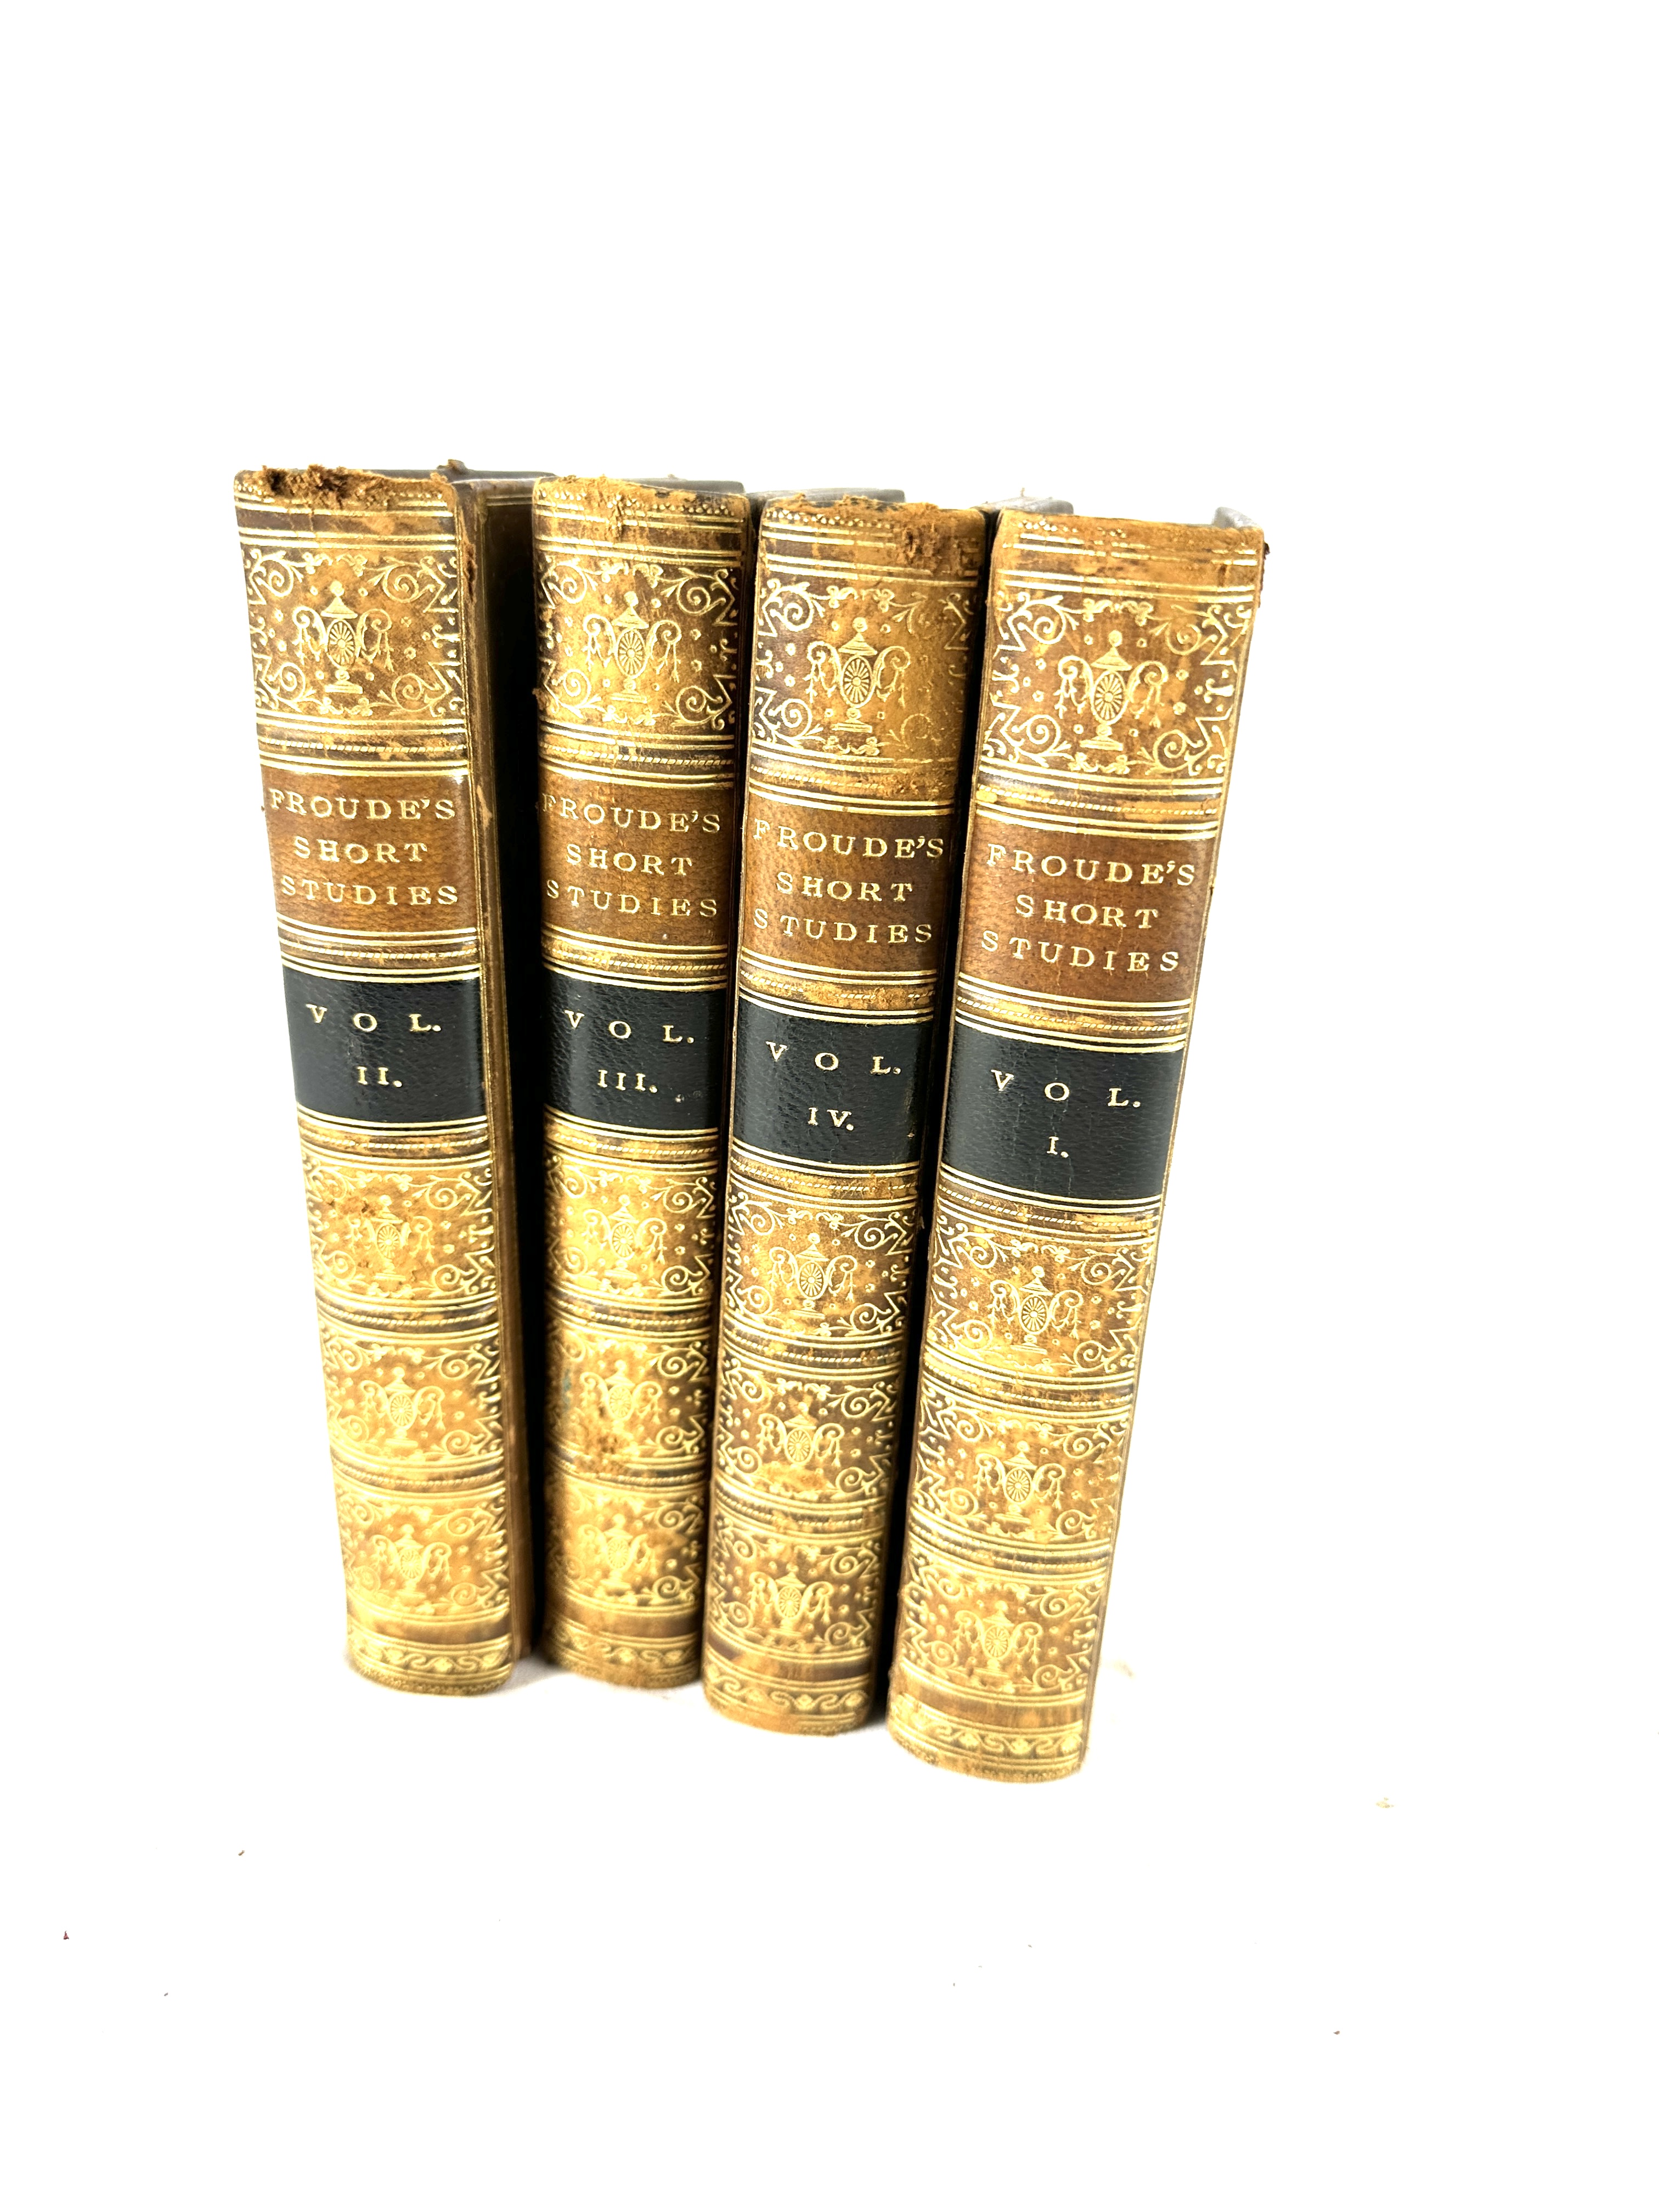 Short Studies of Great Subjects, 1891, four leather bound volumes